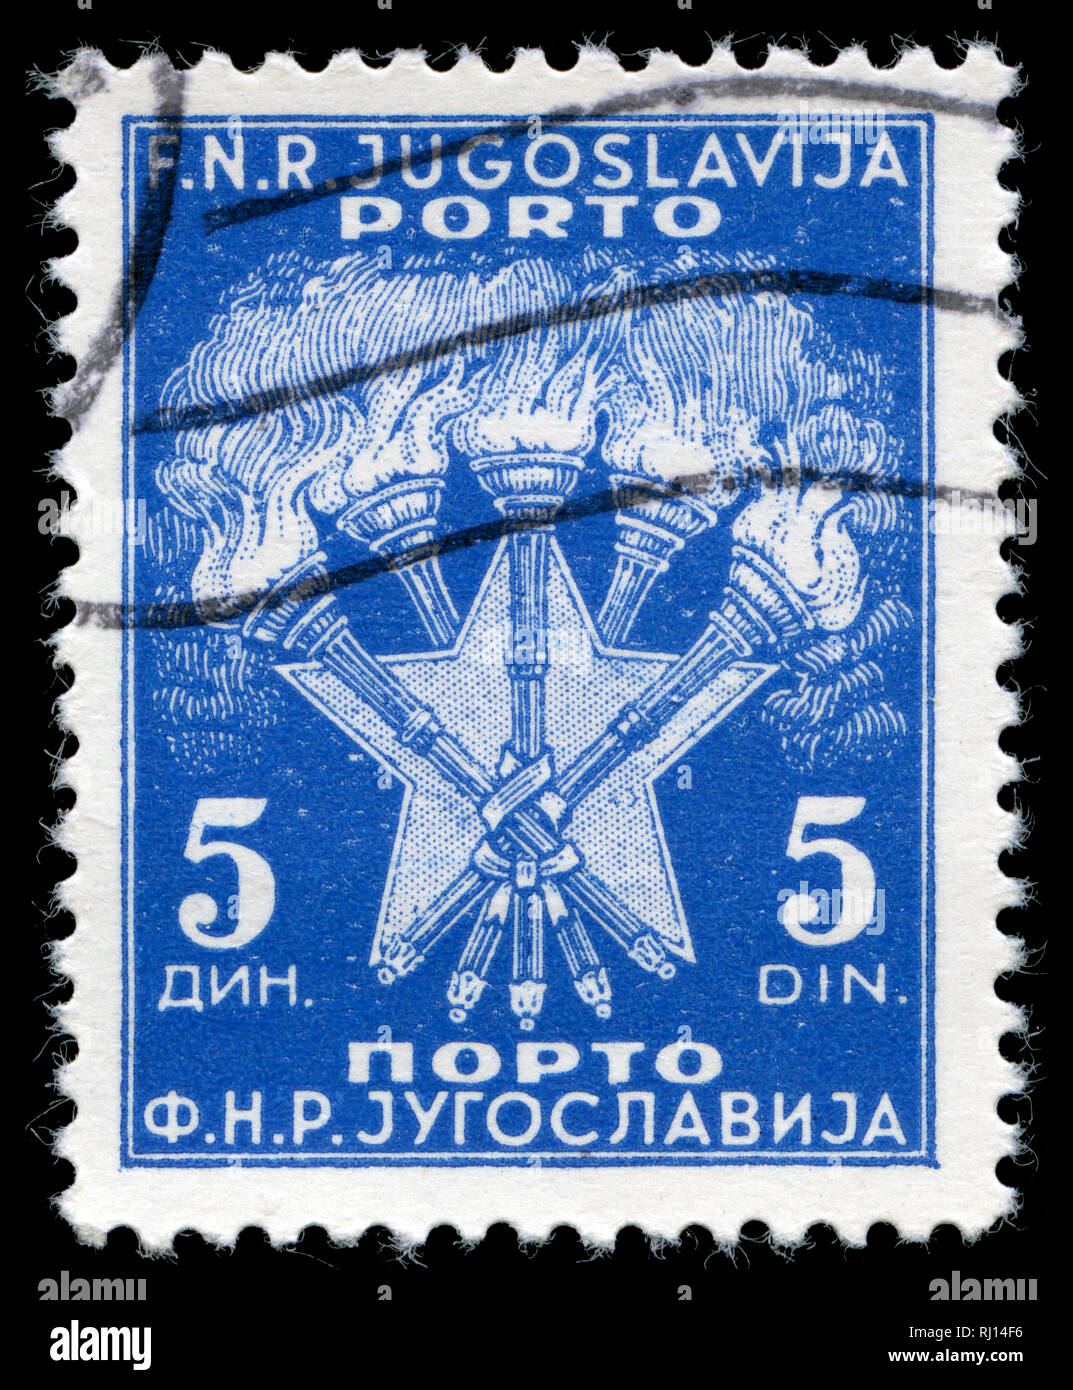 Postage stamp from the former state of Yugoslavia in the Postage due stamps series issued in 1951 Stock Photo